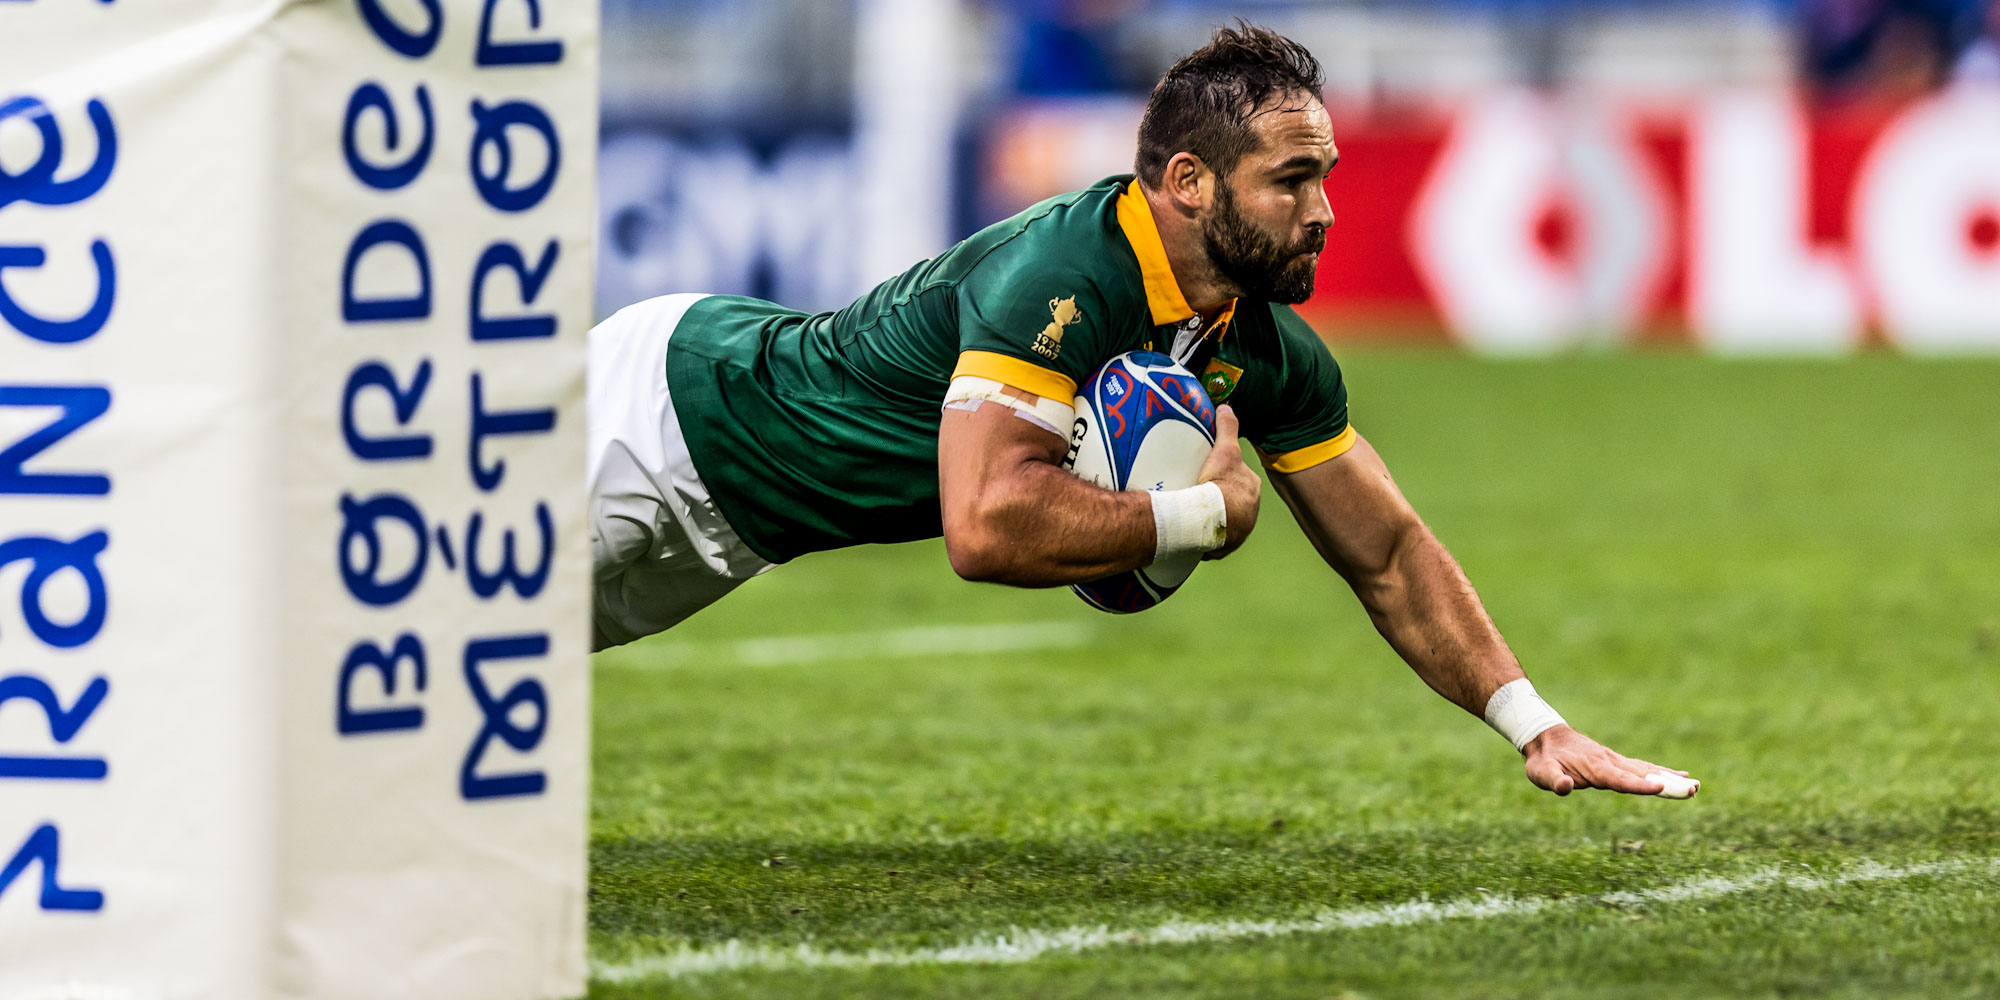 Cobus Reinach scored his second RWC hat-trick for the Boks.